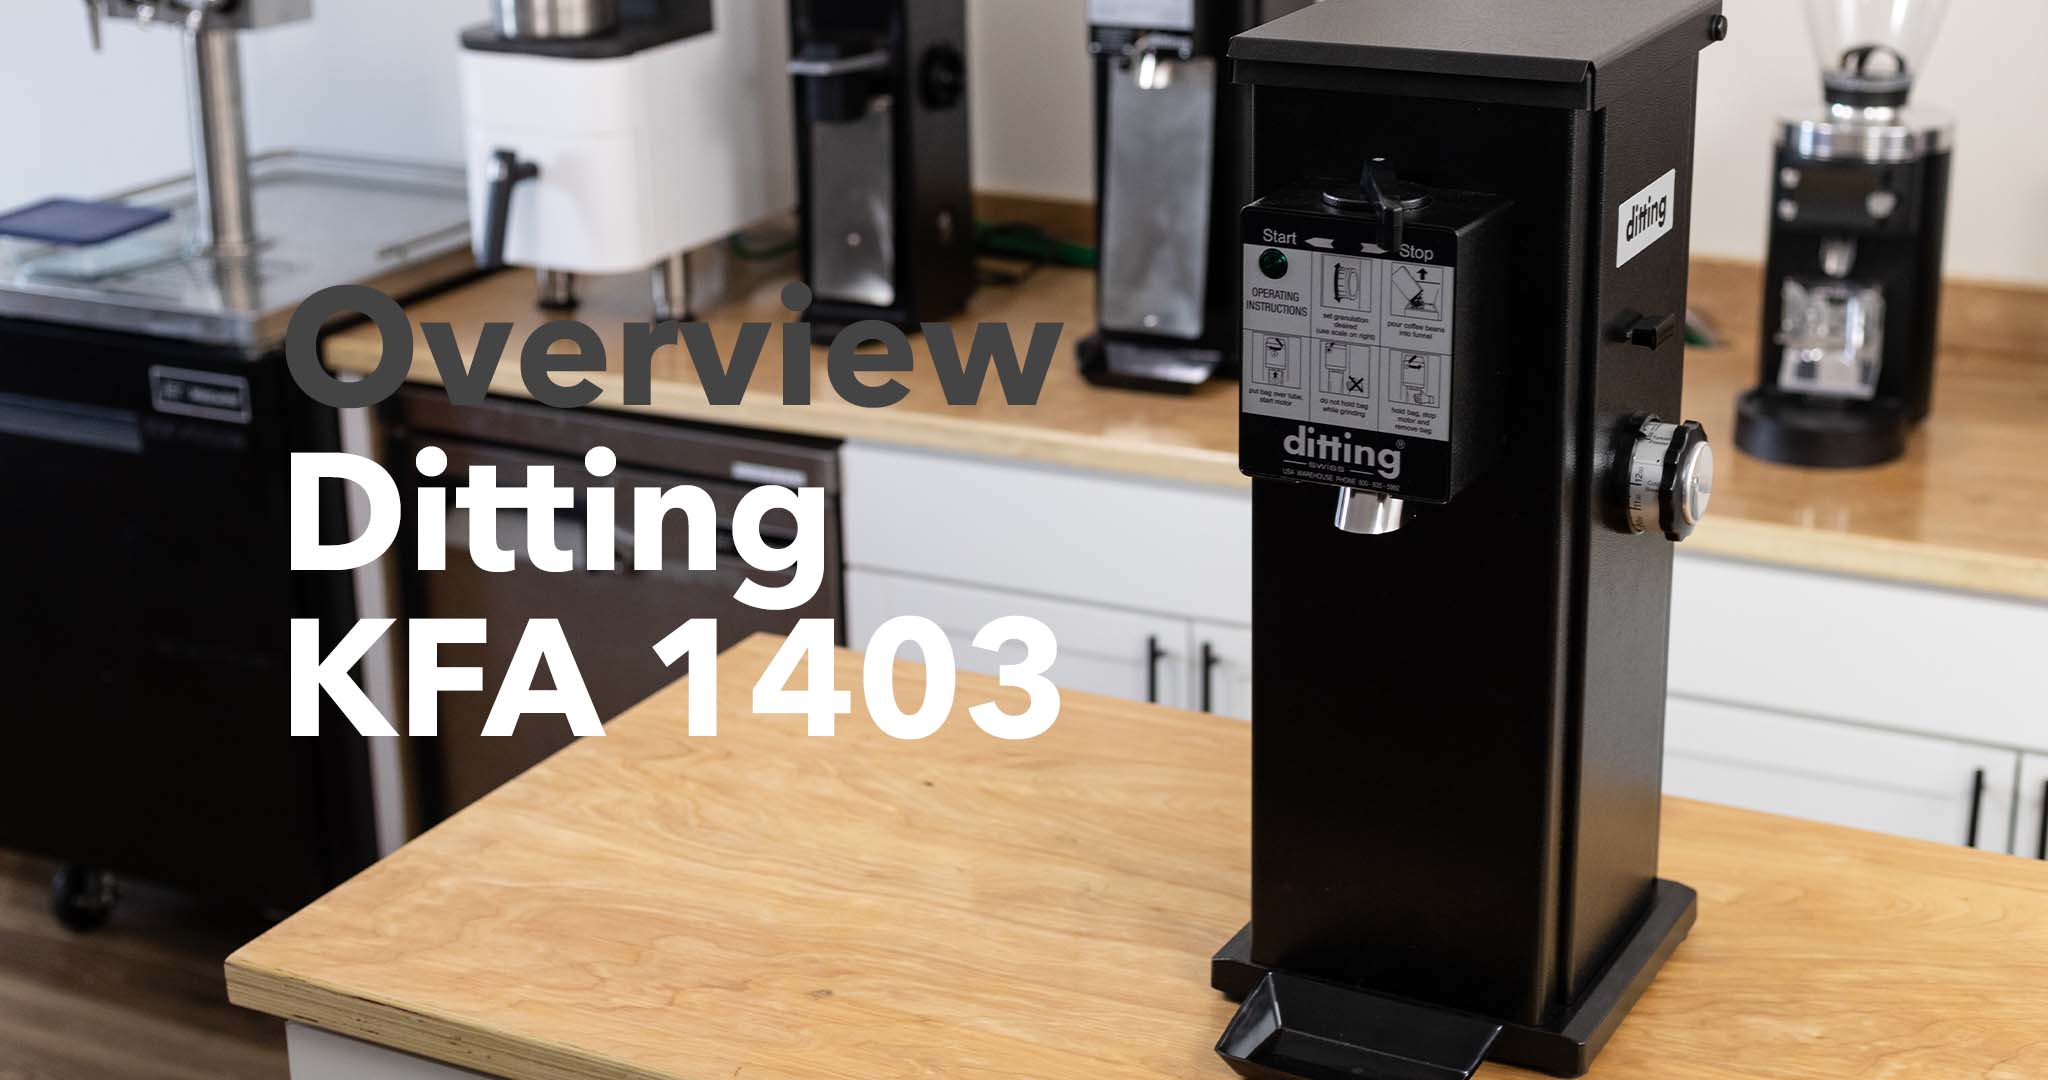 Video Overview | Ditting KFA 1403